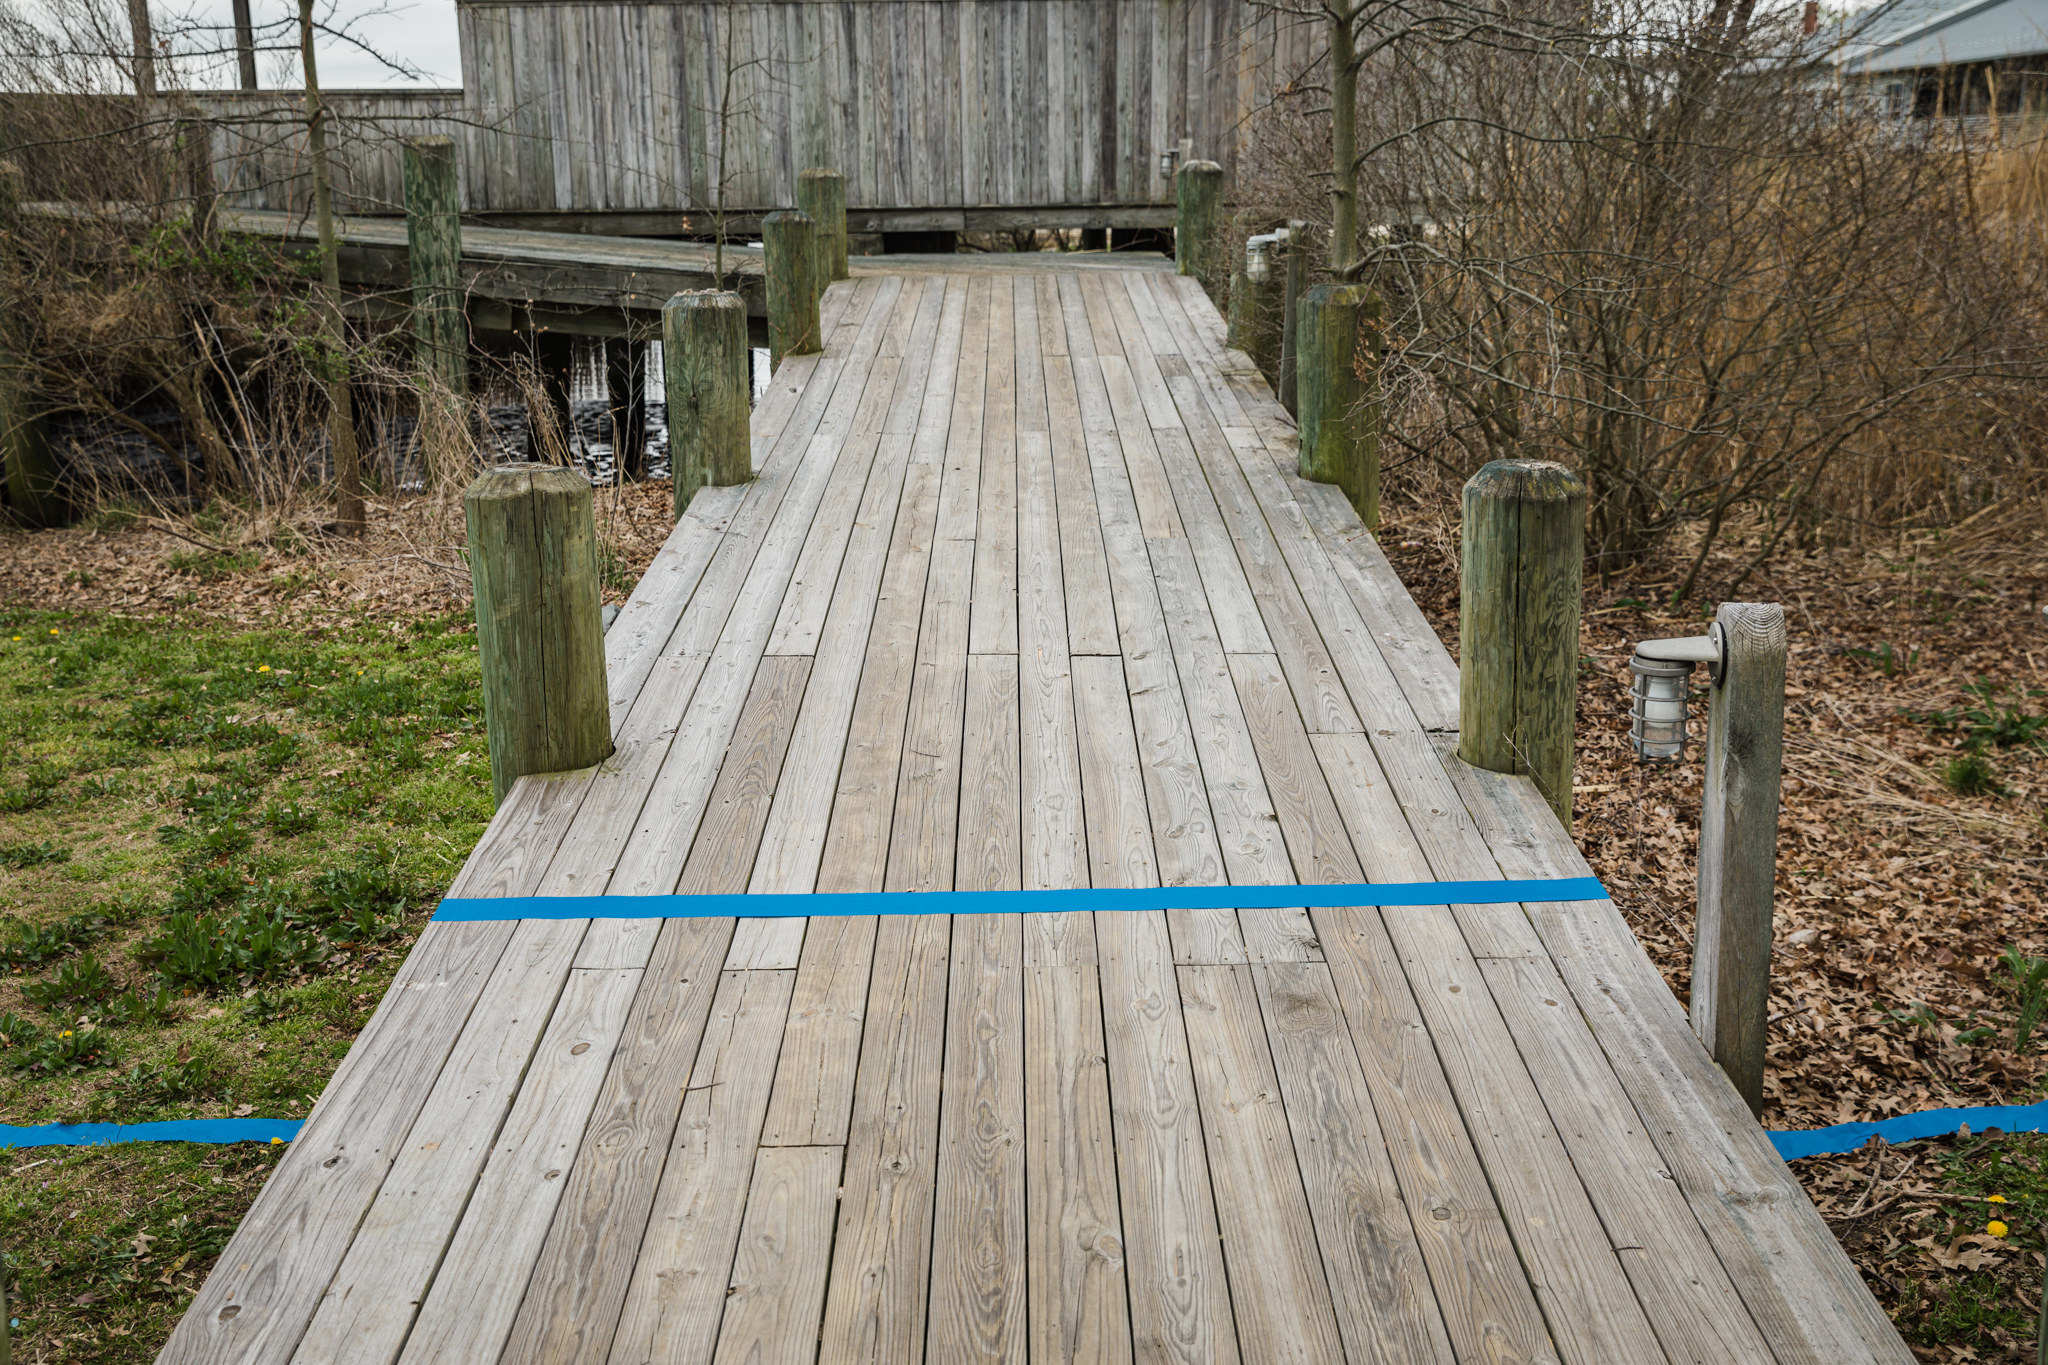 A wooden path with a blue tape across the middle